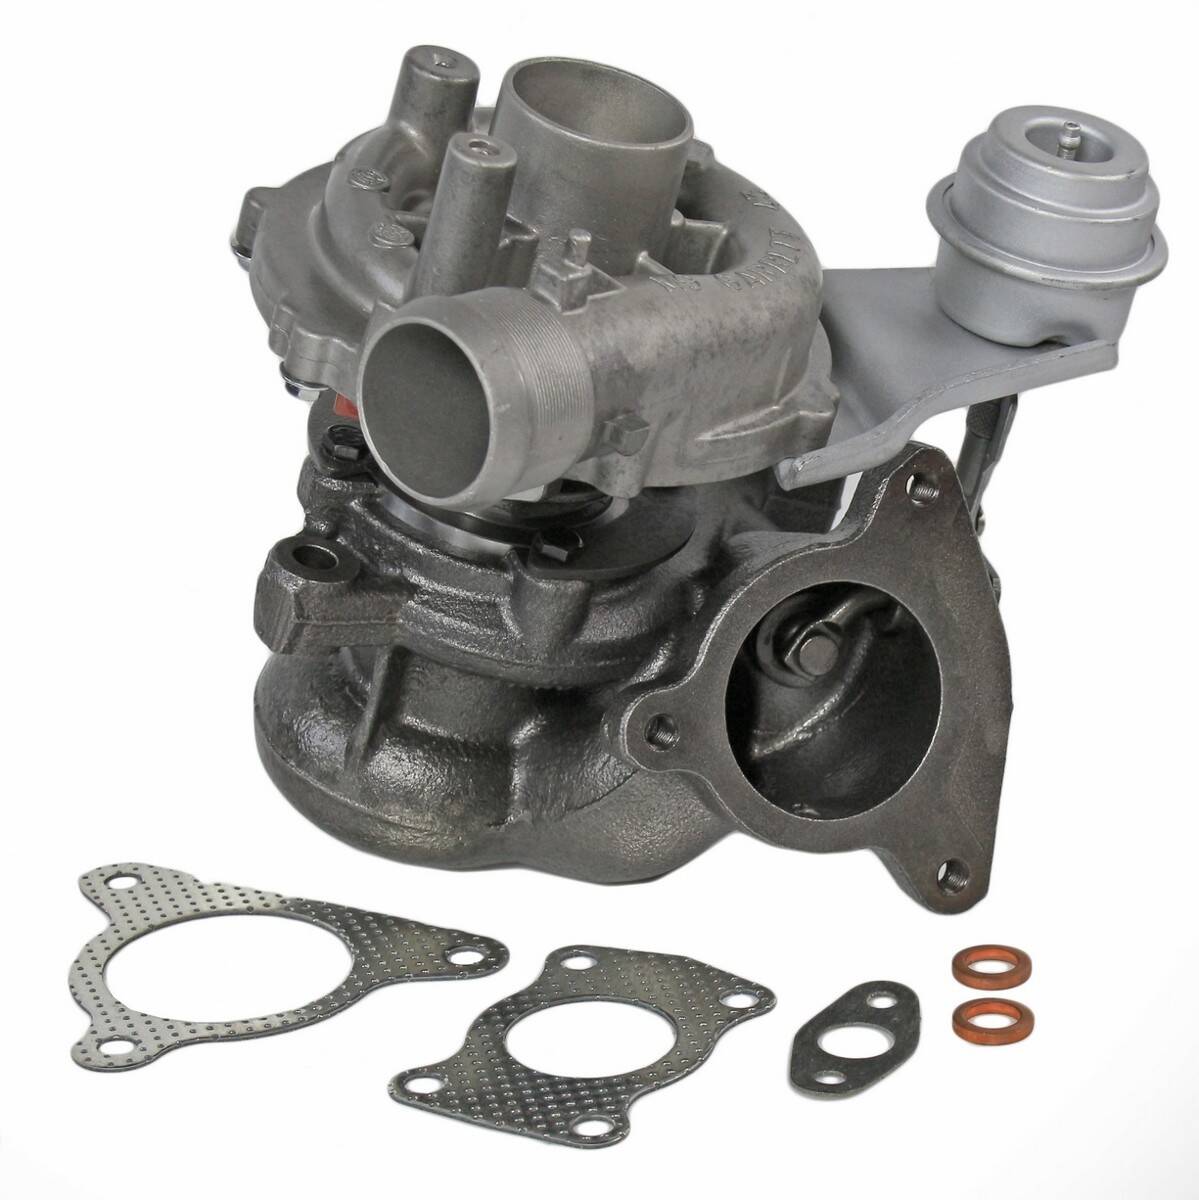 TURBOCHARGER TURBO REMANUFACTURED 706978-0001 706978-0001 706978-0001